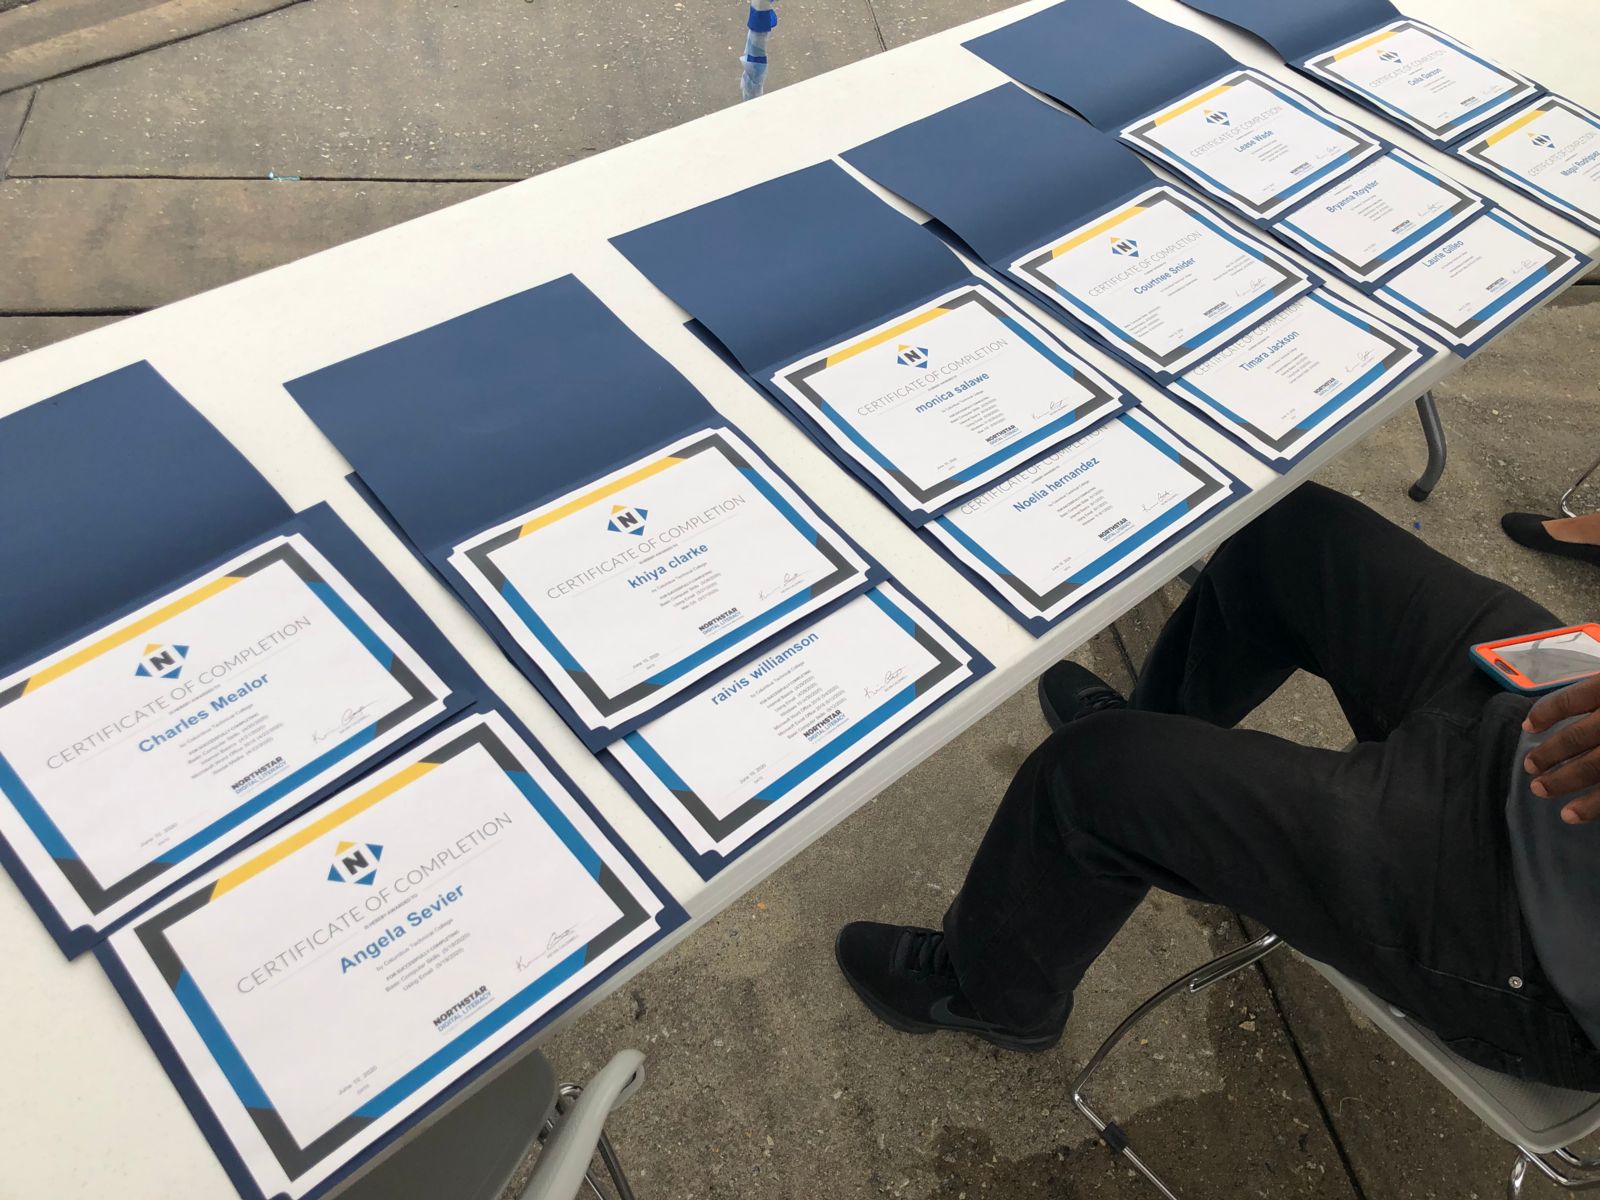 Table full of certificates